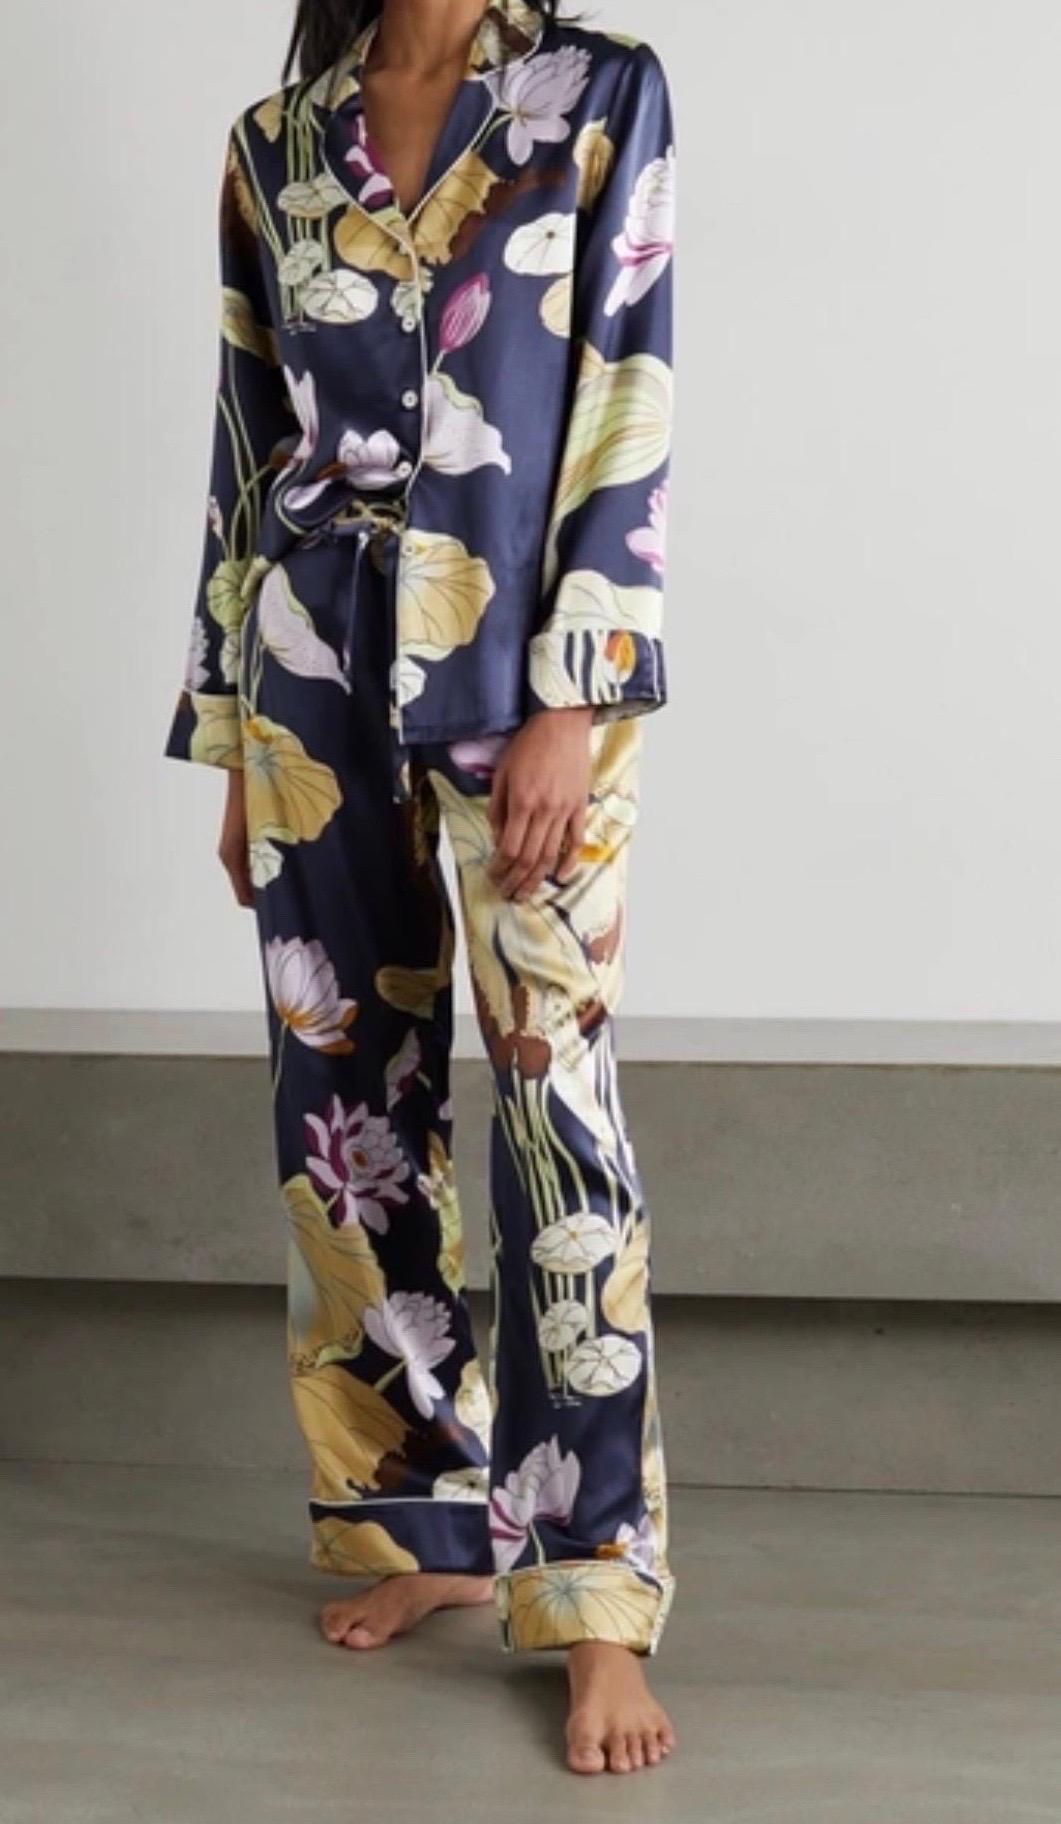 Wonderful 2-piece silk suit by Olivia von Halle

This stunning suit is cut in a relaxed fit and creates an effortless elegant & luxurious look.

• Floral screen prin
• Piped silk trims
• Flat fronted waistband with elasticated back
• Drawstring